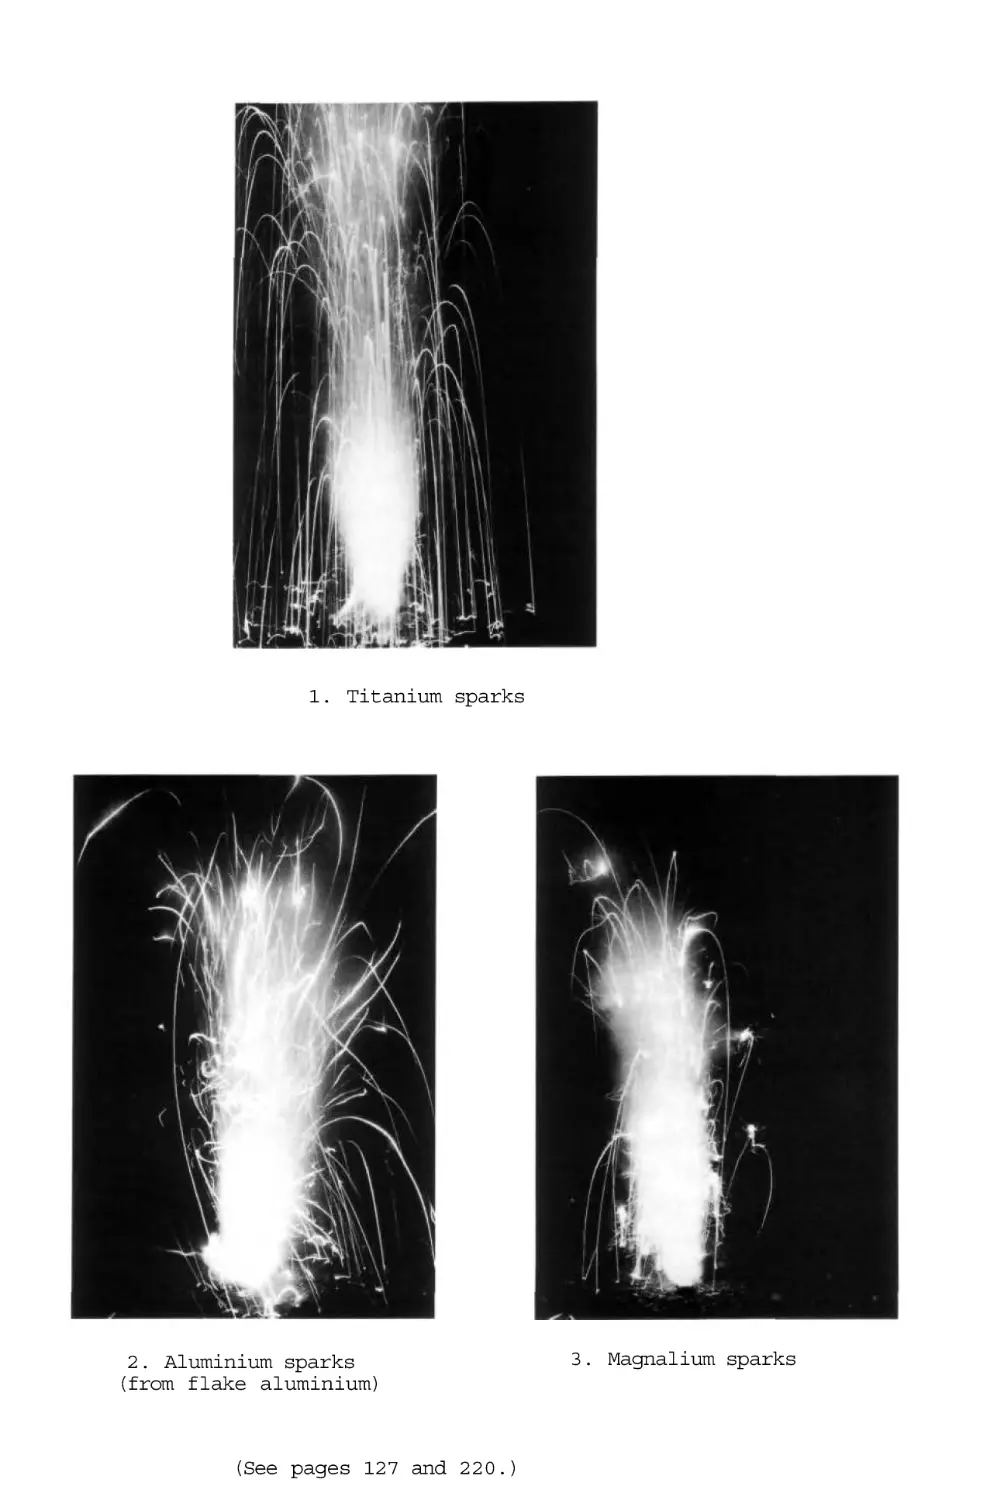 PICTURES OF METAL SPARKS